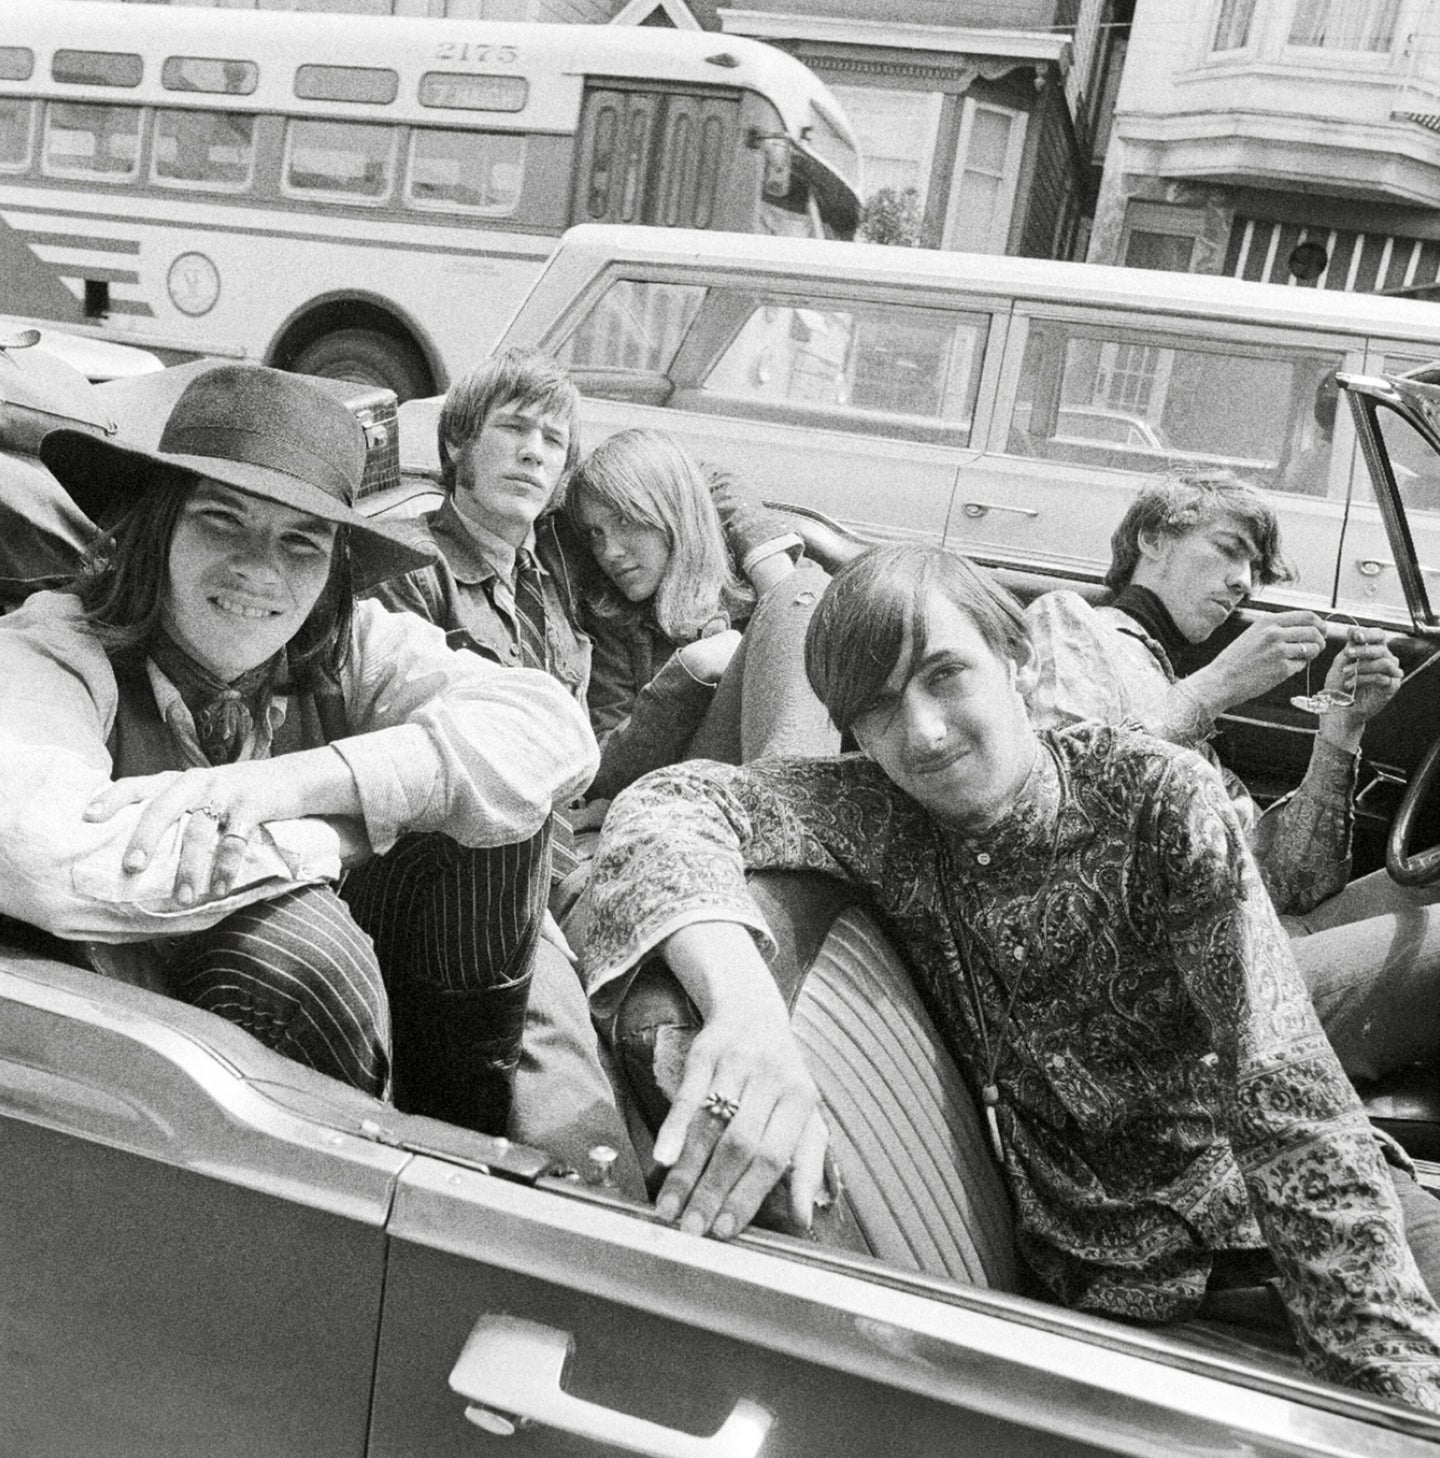 A B&W photo of a convertible full of youths in 1968.